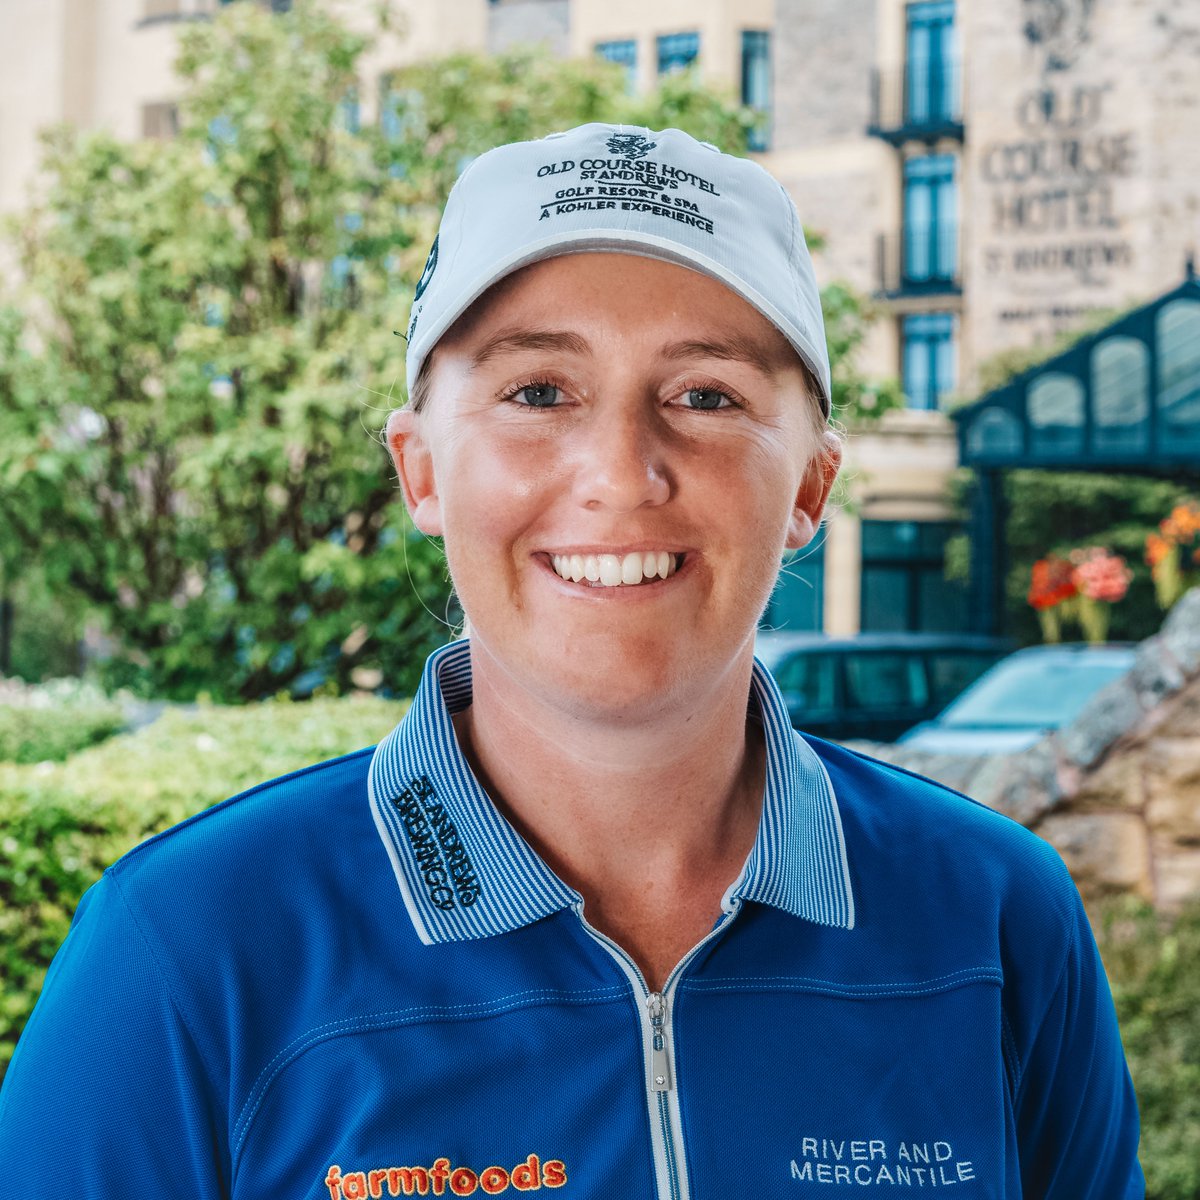 @PGATOUR @ScotsmanSport 🏴󠁧󠁢󠁳󠁣󠁴󠁿's Gemma Dryburgh ⬇️ gets her 2024 @LPGA campaign underway this week as she competes in Hilton Grand Vacations Tournament of Champions at Lake Nona Golf & Country Club in Florida. The $1.5m event involves just 35 professionals with no cut @ScotsmanSport @gemmadryburgh